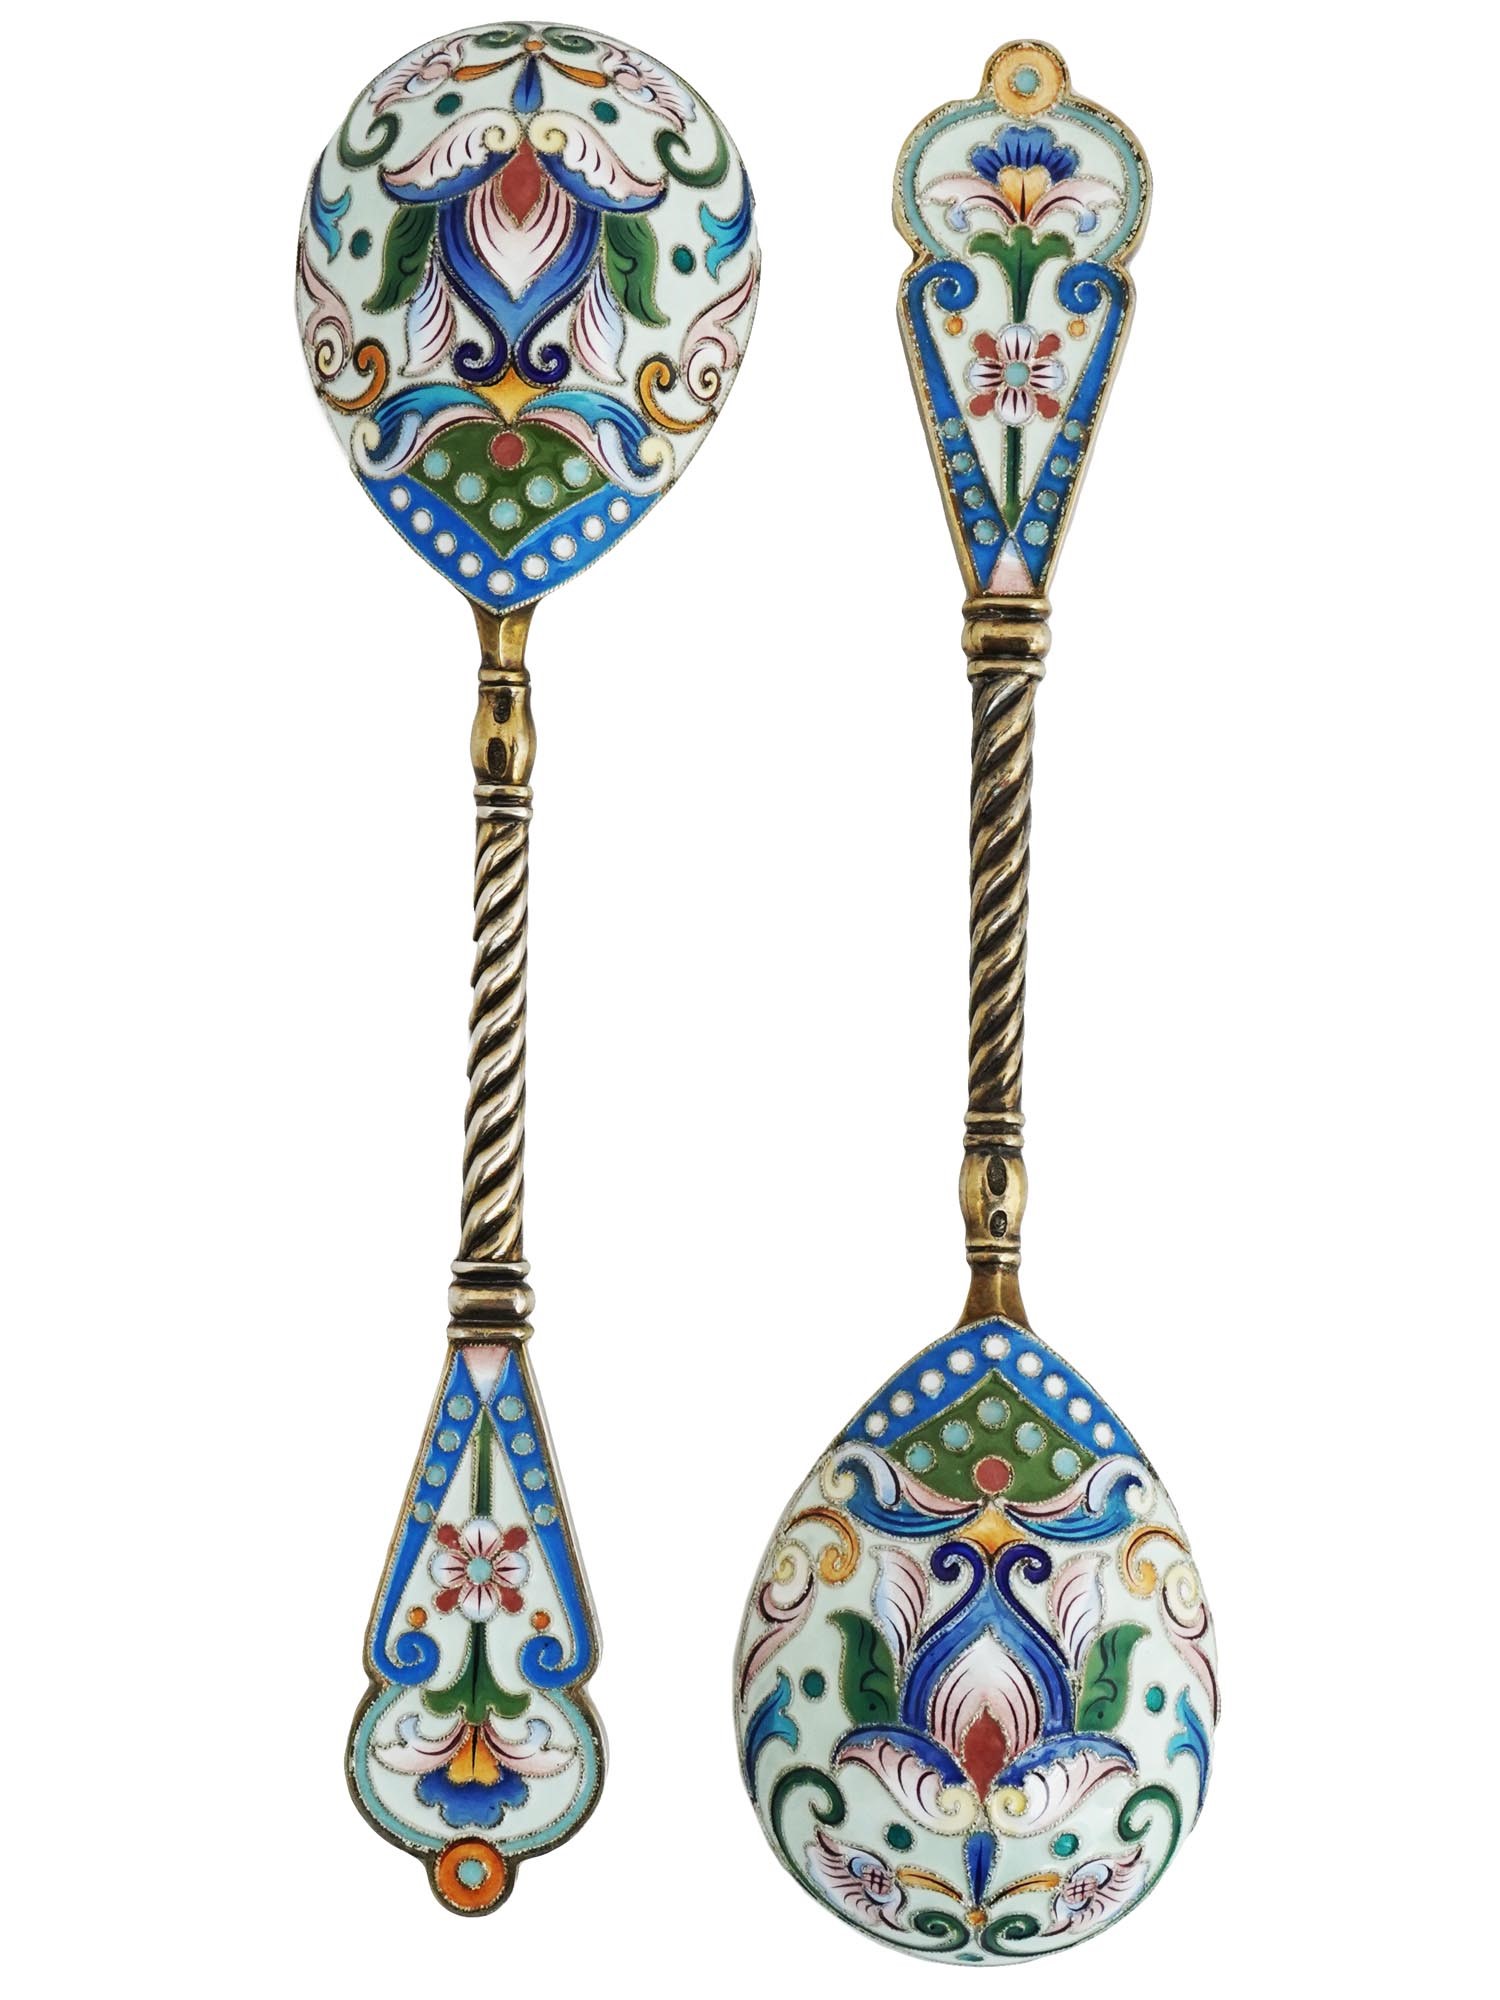 PAIR OF RUSSIAN SILVER AND CLOISONNE ENAMEL SPOON PIC-0